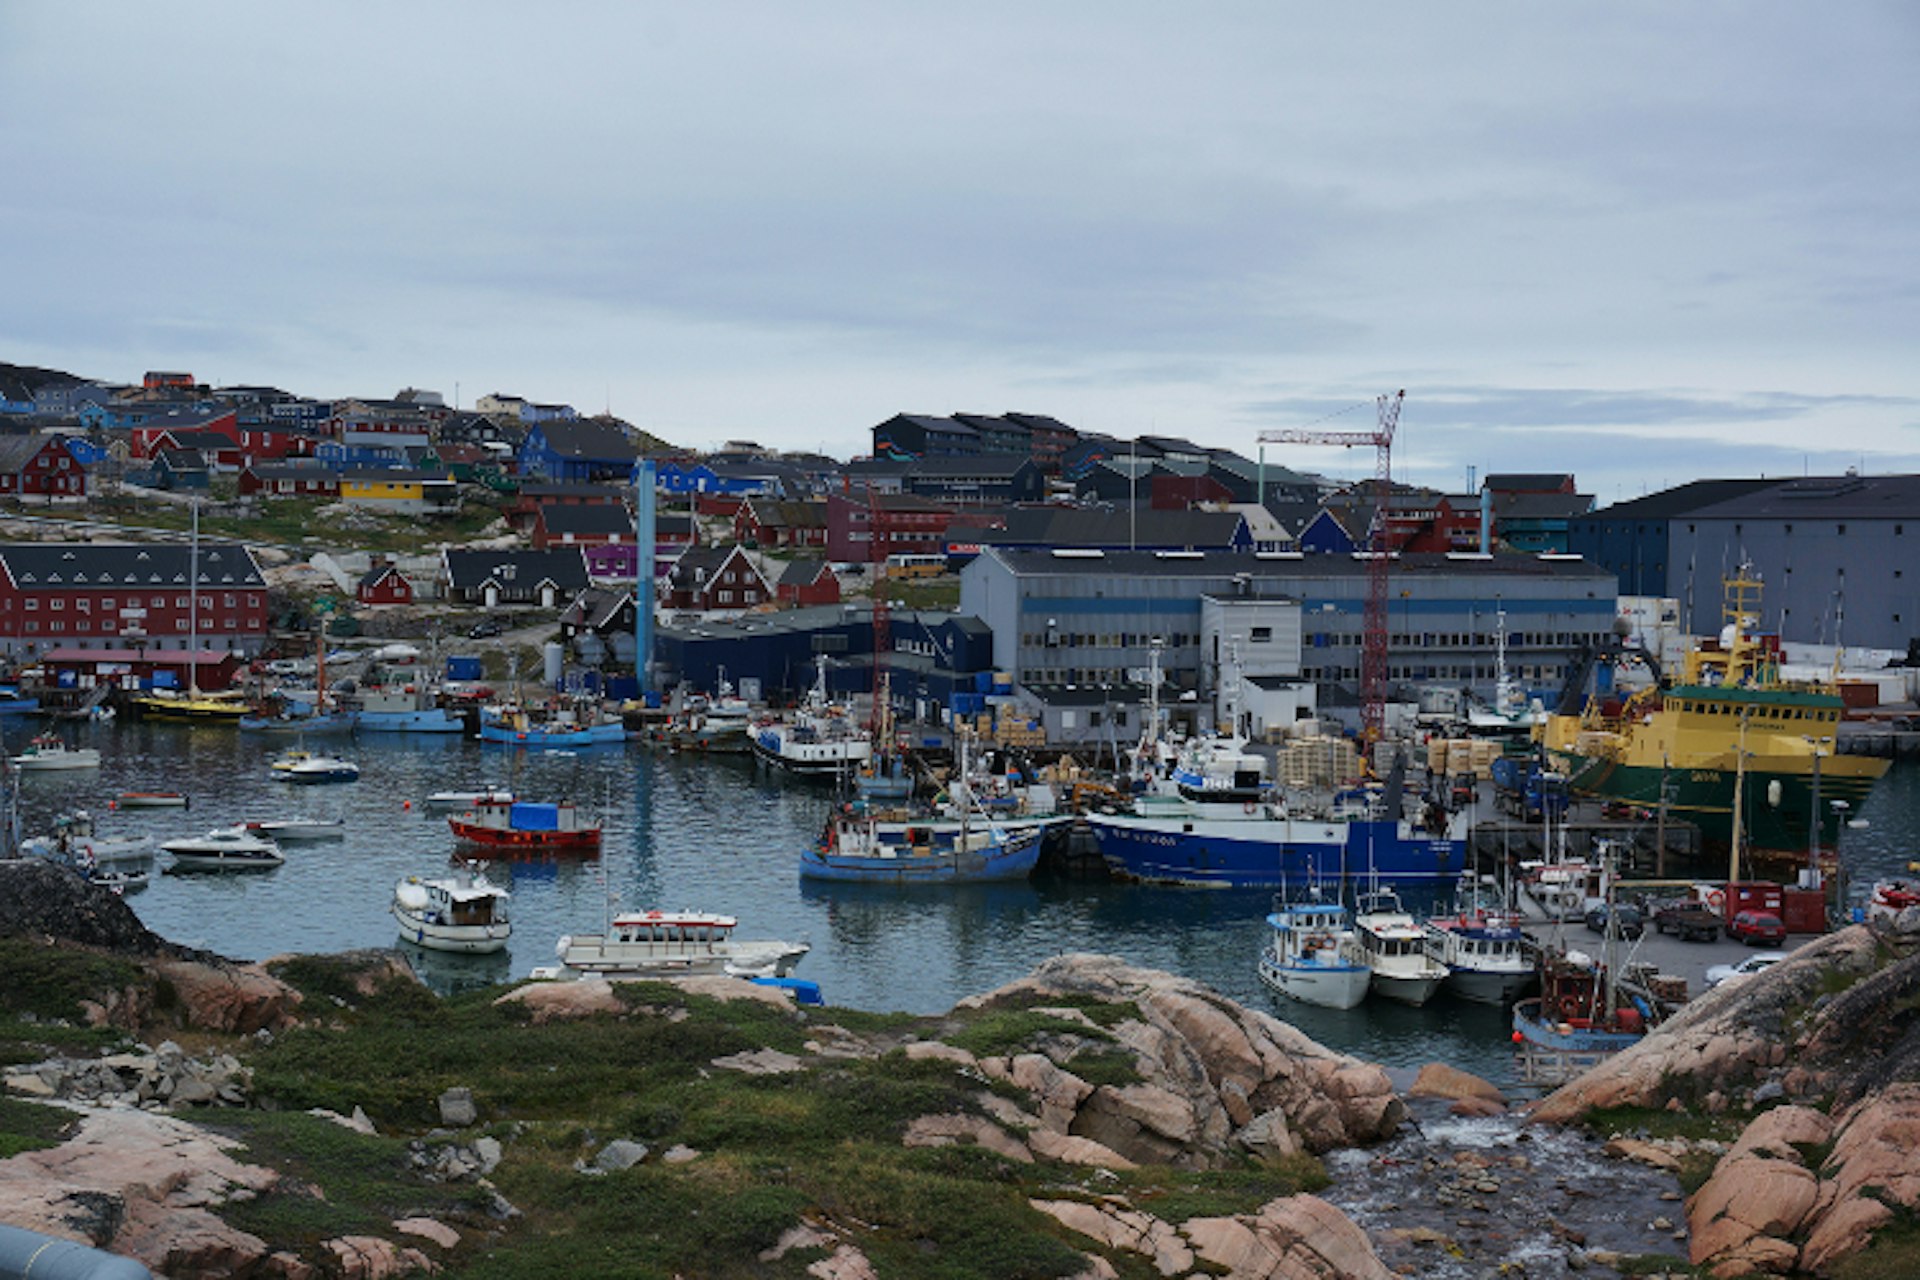 The cluttered harbour of Ilulissat harbour, Greenland-750-cs